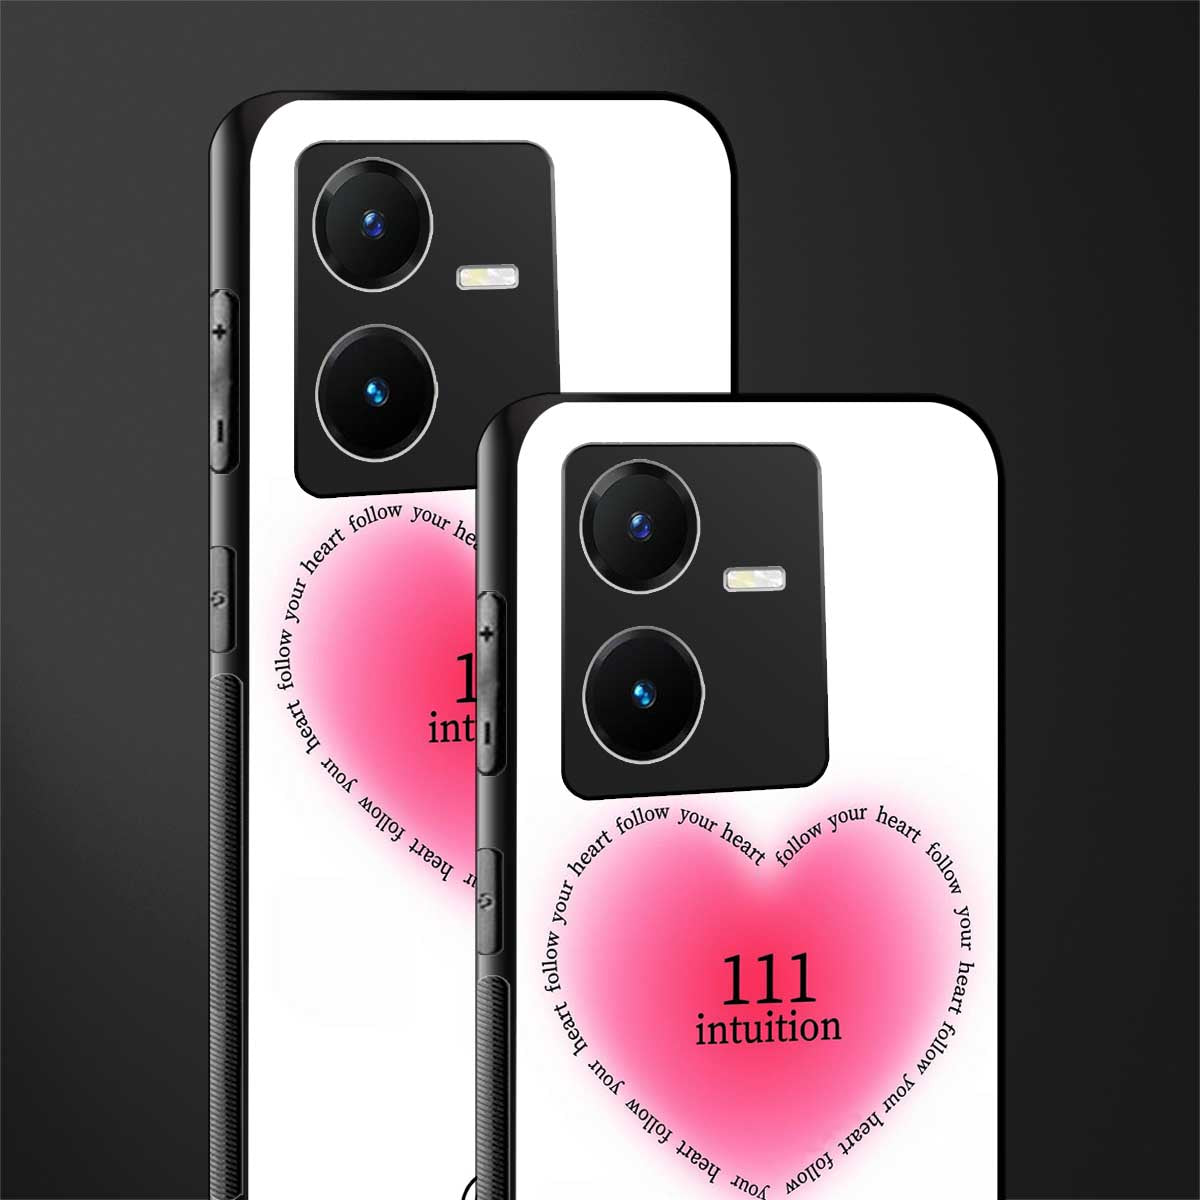 111 intuition back phone cover | glass case for vivo y22